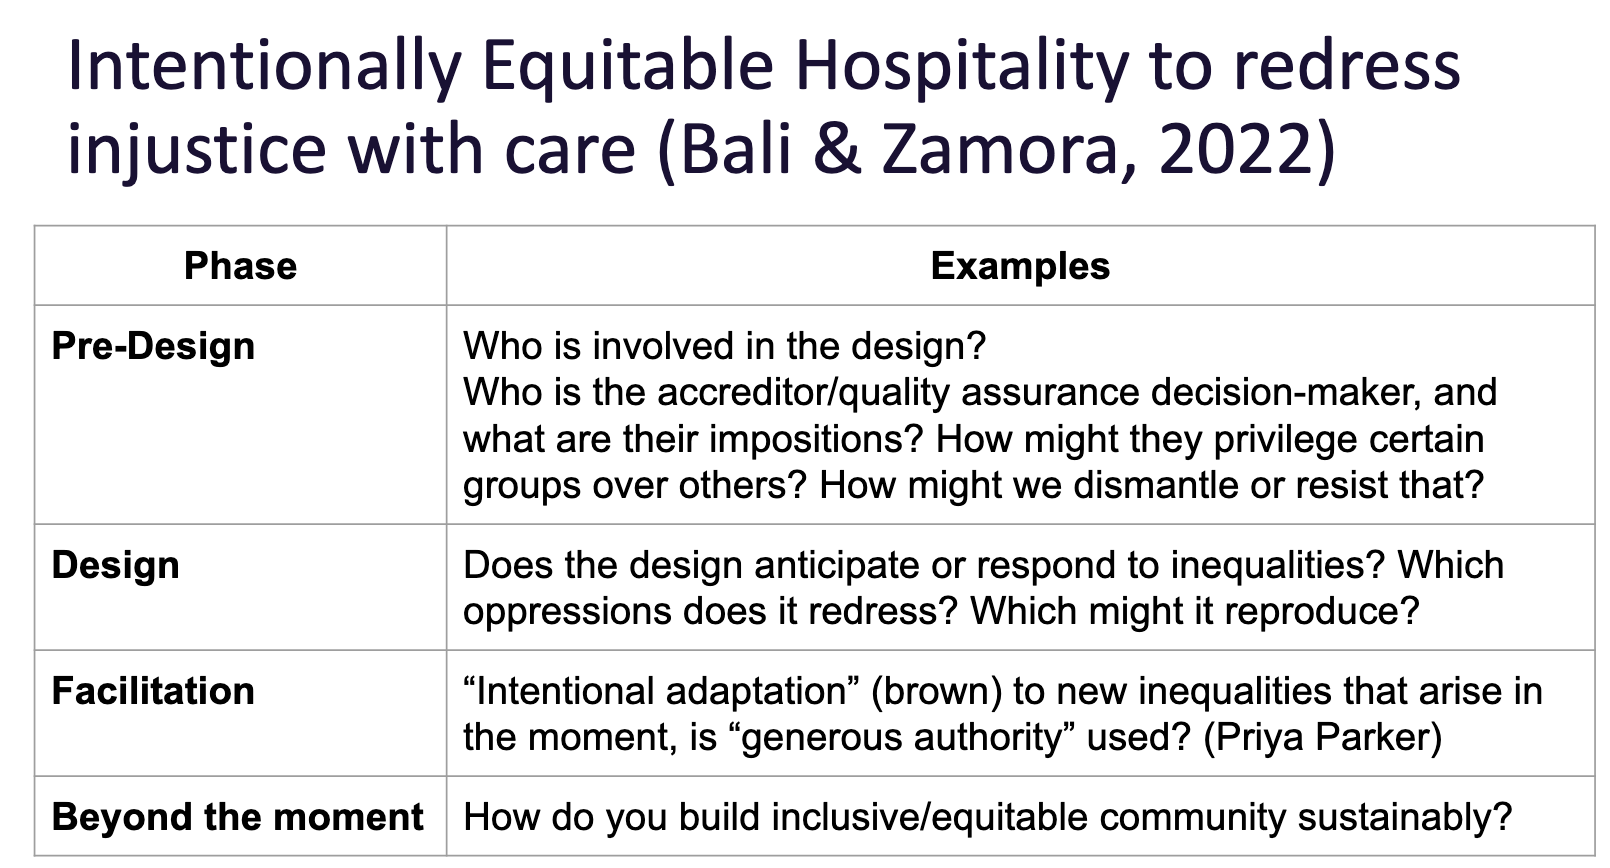 Four phases of intentionally equitable hospitality; further description in the text below.